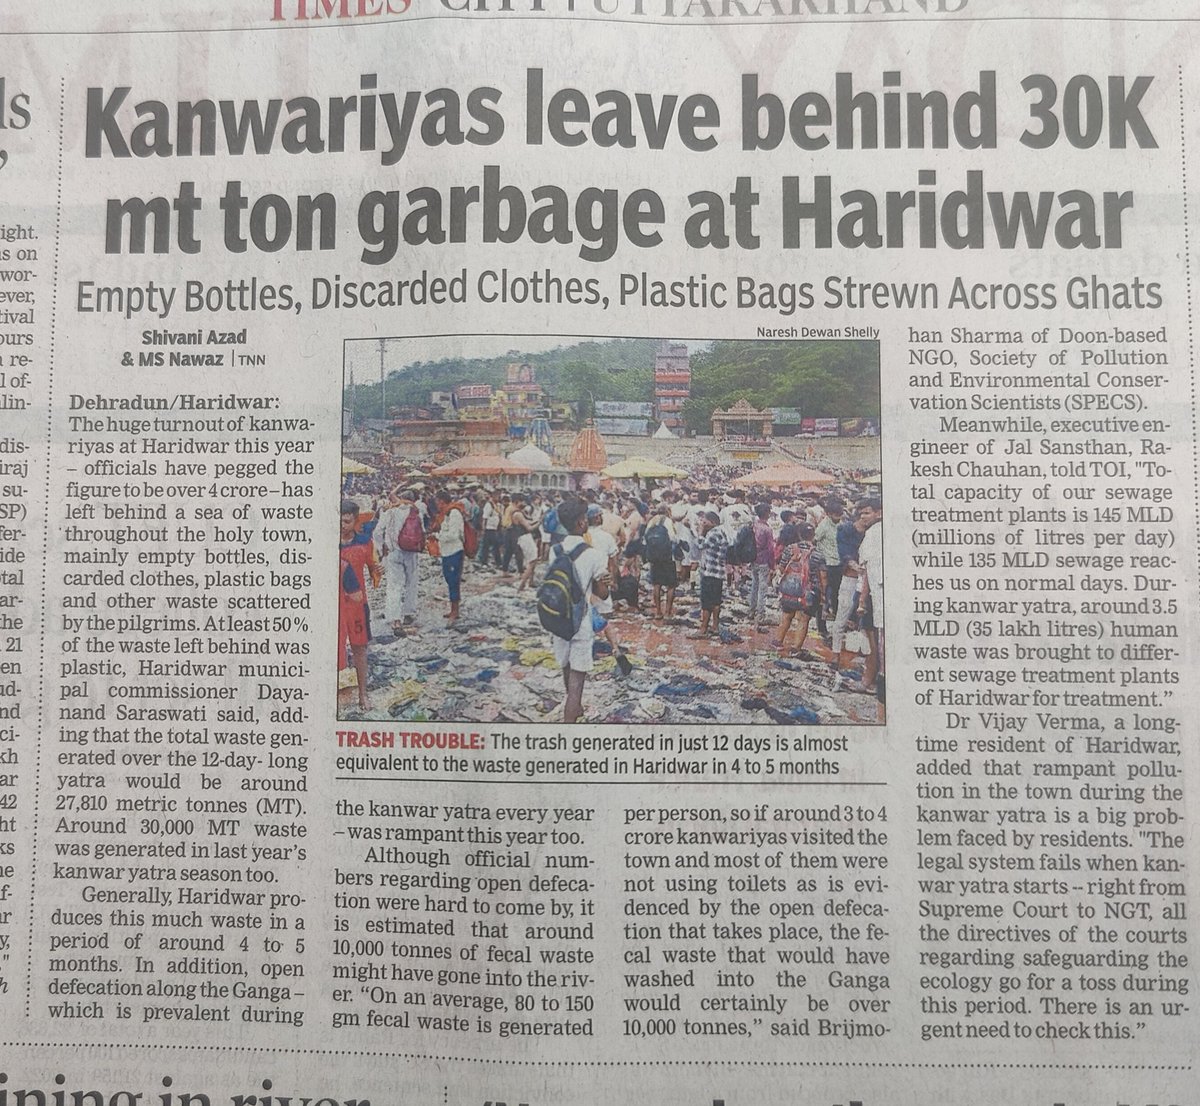 5 key data takeaways: A. 4 Crore Kanwariyas in #Haridwar in 12 days B. 3 Crore KG total waste generated C. 1 Crore KG fecal waste generated D. 50% plastic waste E. 10X waste (12 days) compared to normal State needs to recognise challenge & invest in waste infra/behaviour change